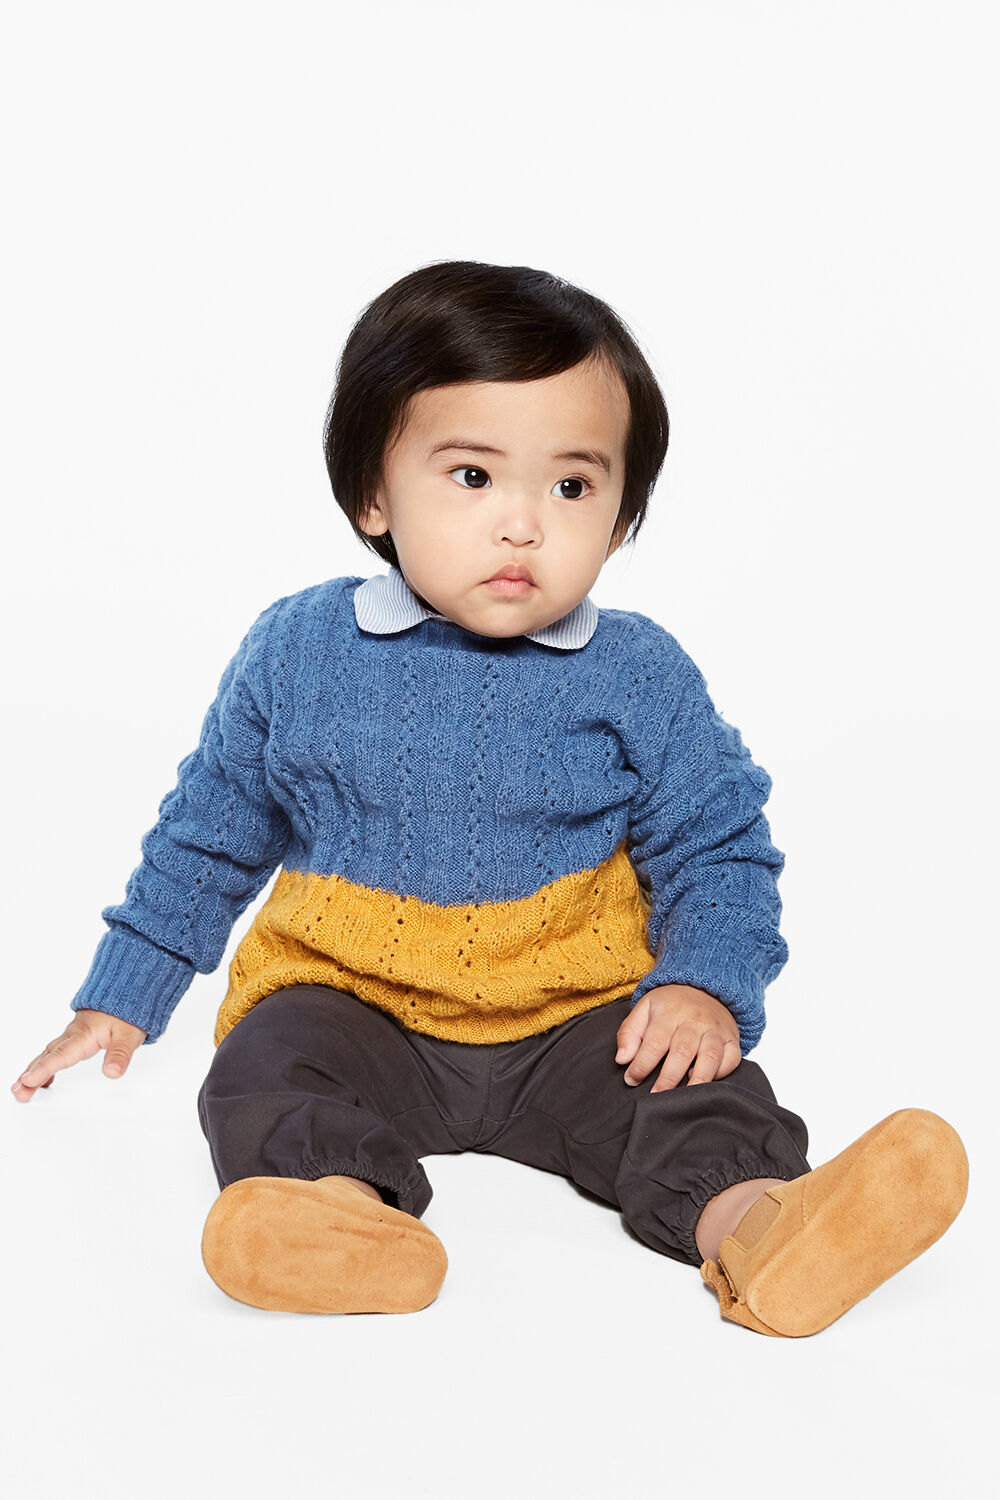 baby boy knitted jumper